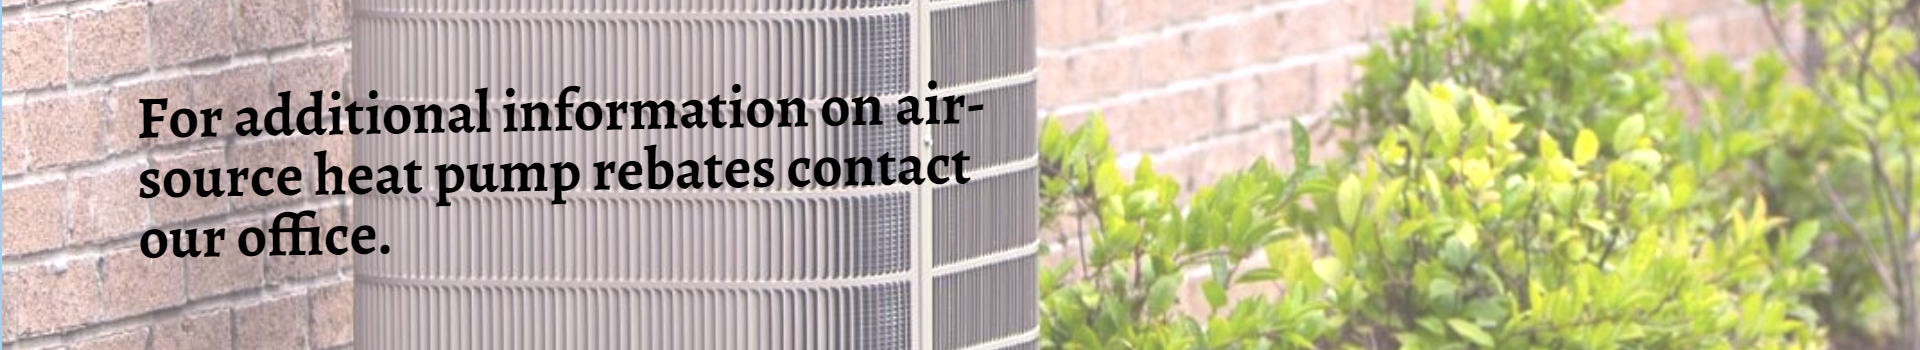 Additional Information on air-source heat pumps.